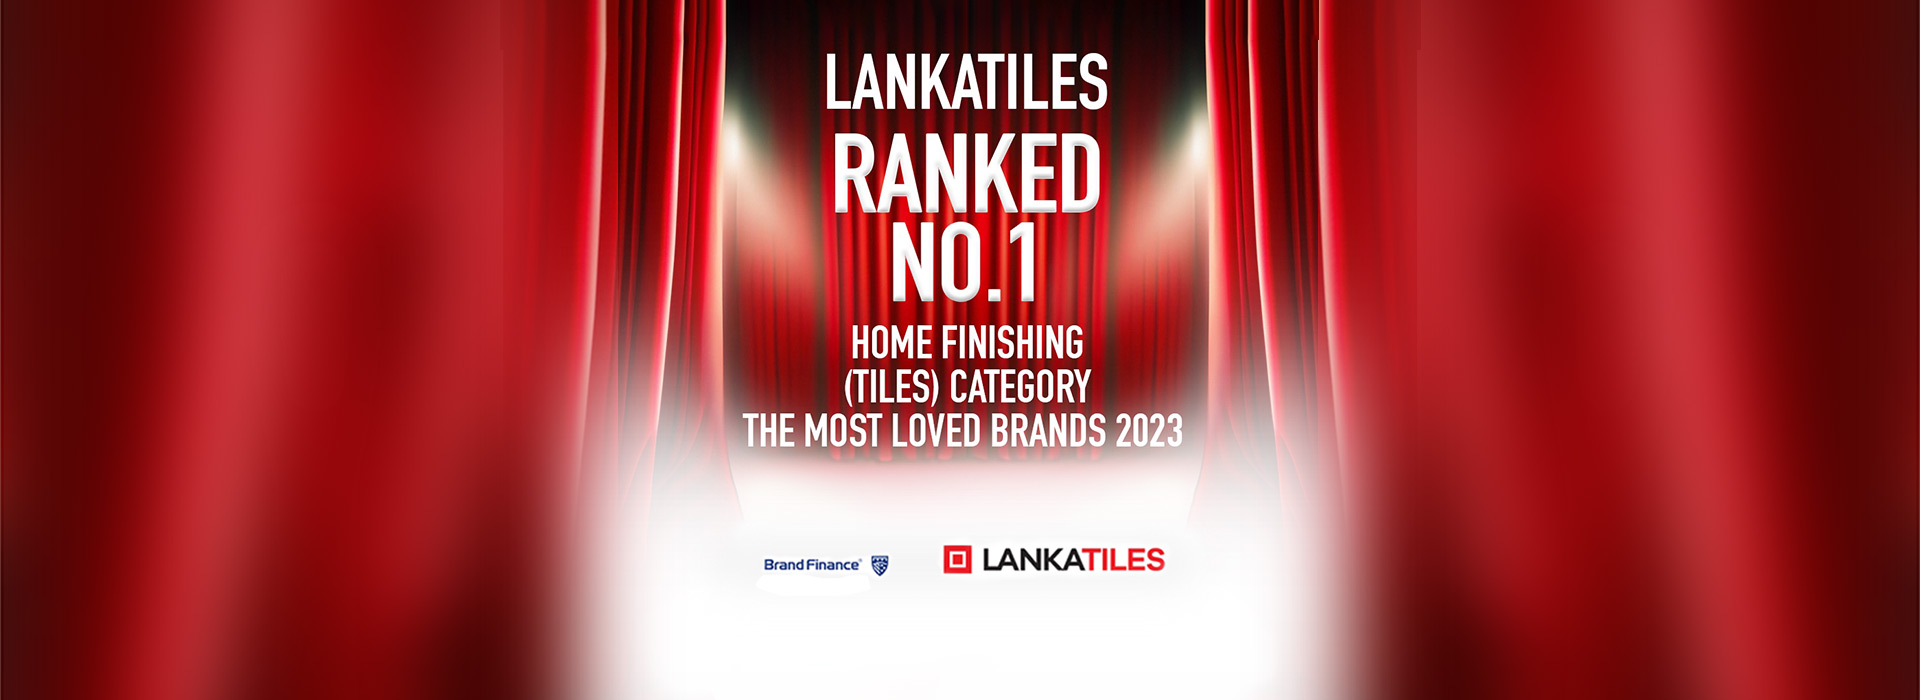 Lankatiles Ranked No.1 In The Most Loved Brands 2023 Rankings Under The Home Finishing (Tiles) Category